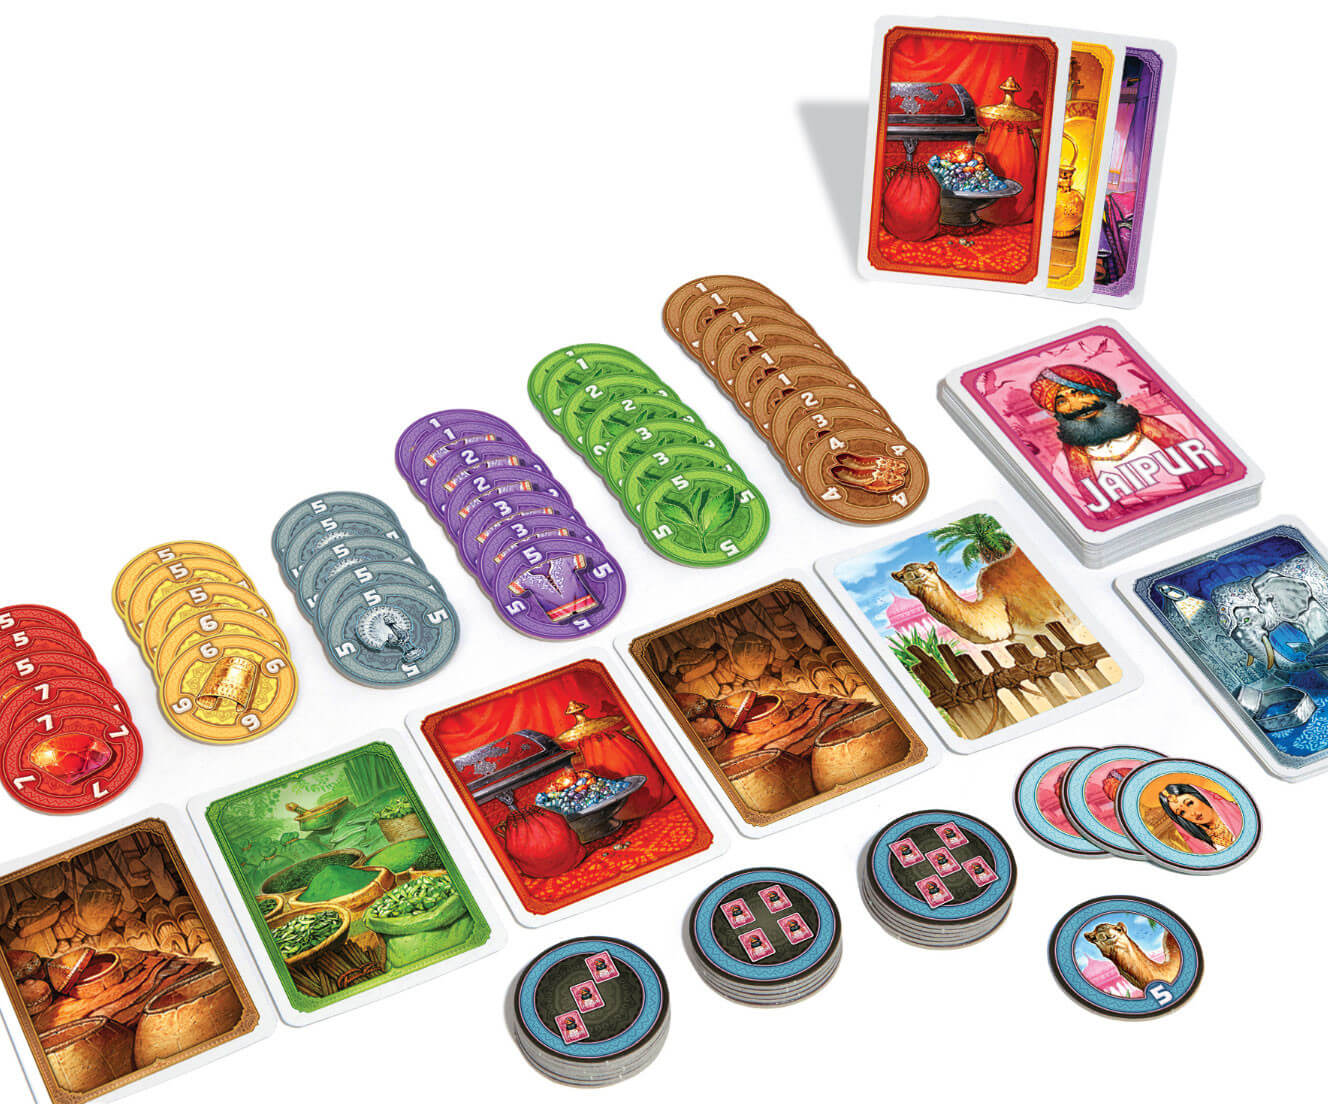 Play Jaipur online from your browser • Board Game Arena